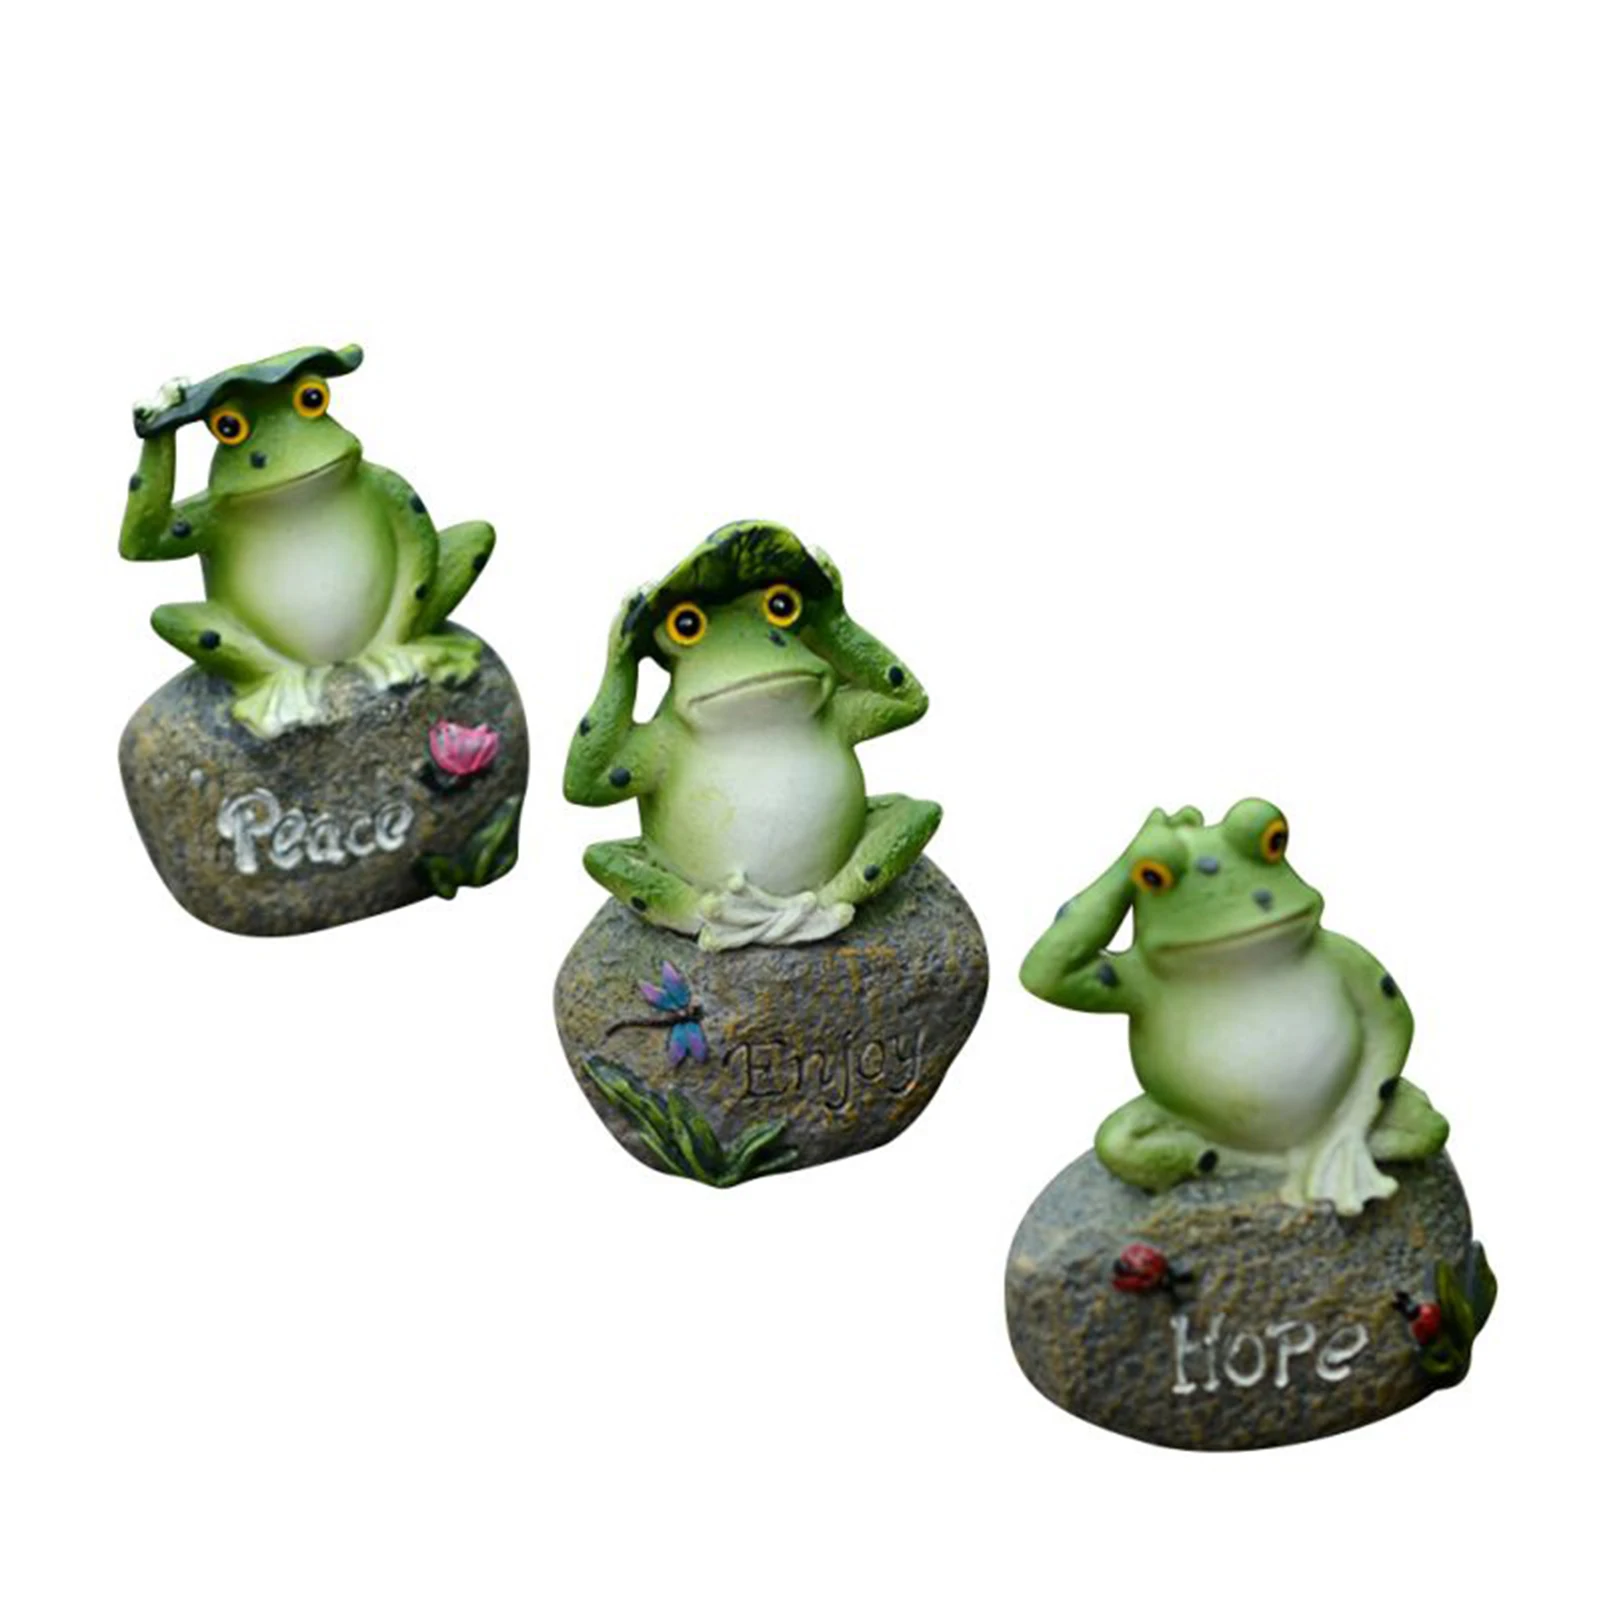 

5 Inch Garden Frog Statue Stone Sculptures Garden Patio Frogs Landscaping Stone Ornaments Decoration LAD3